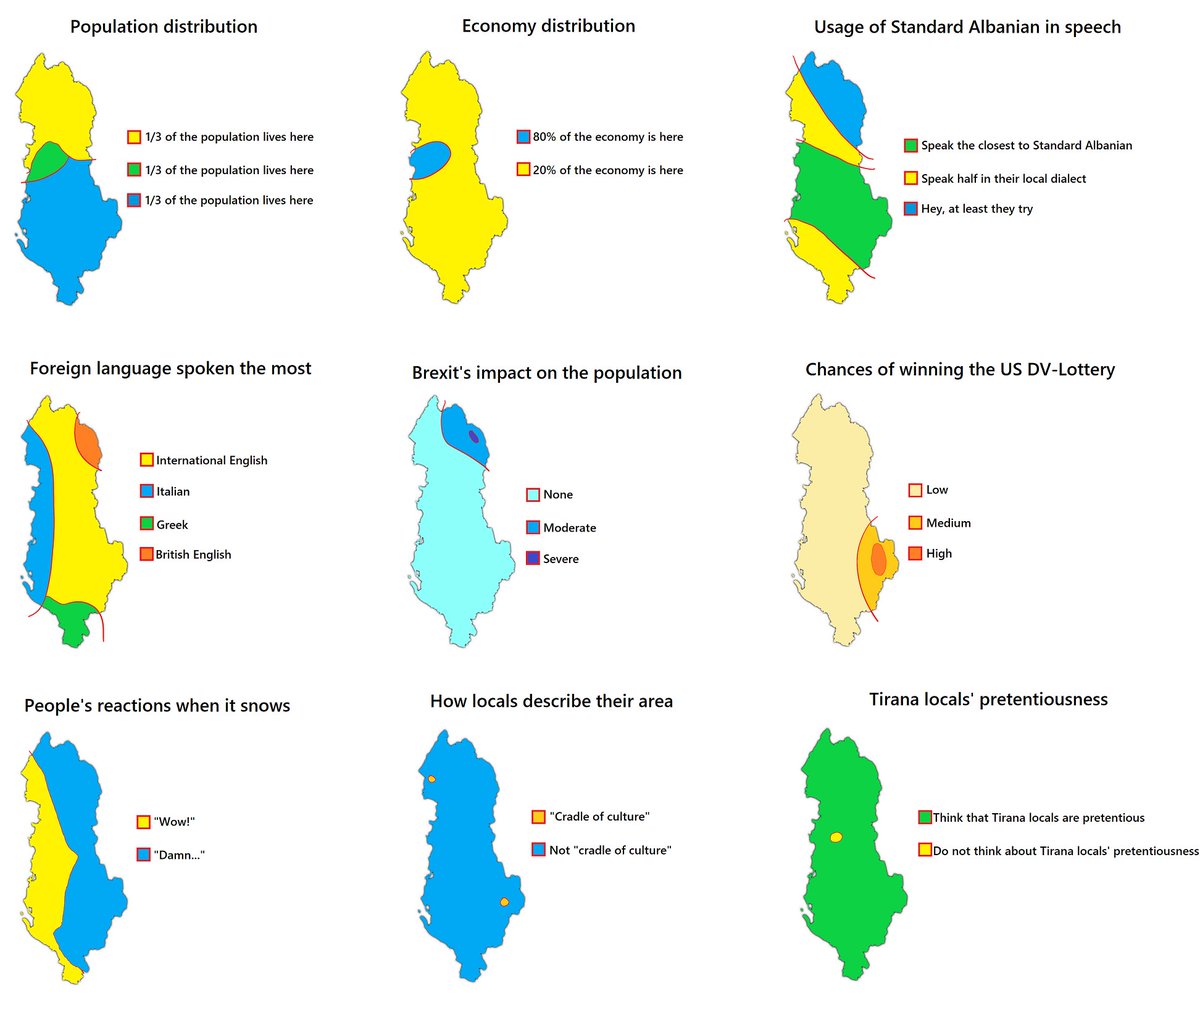 9 ways to divide Albania.